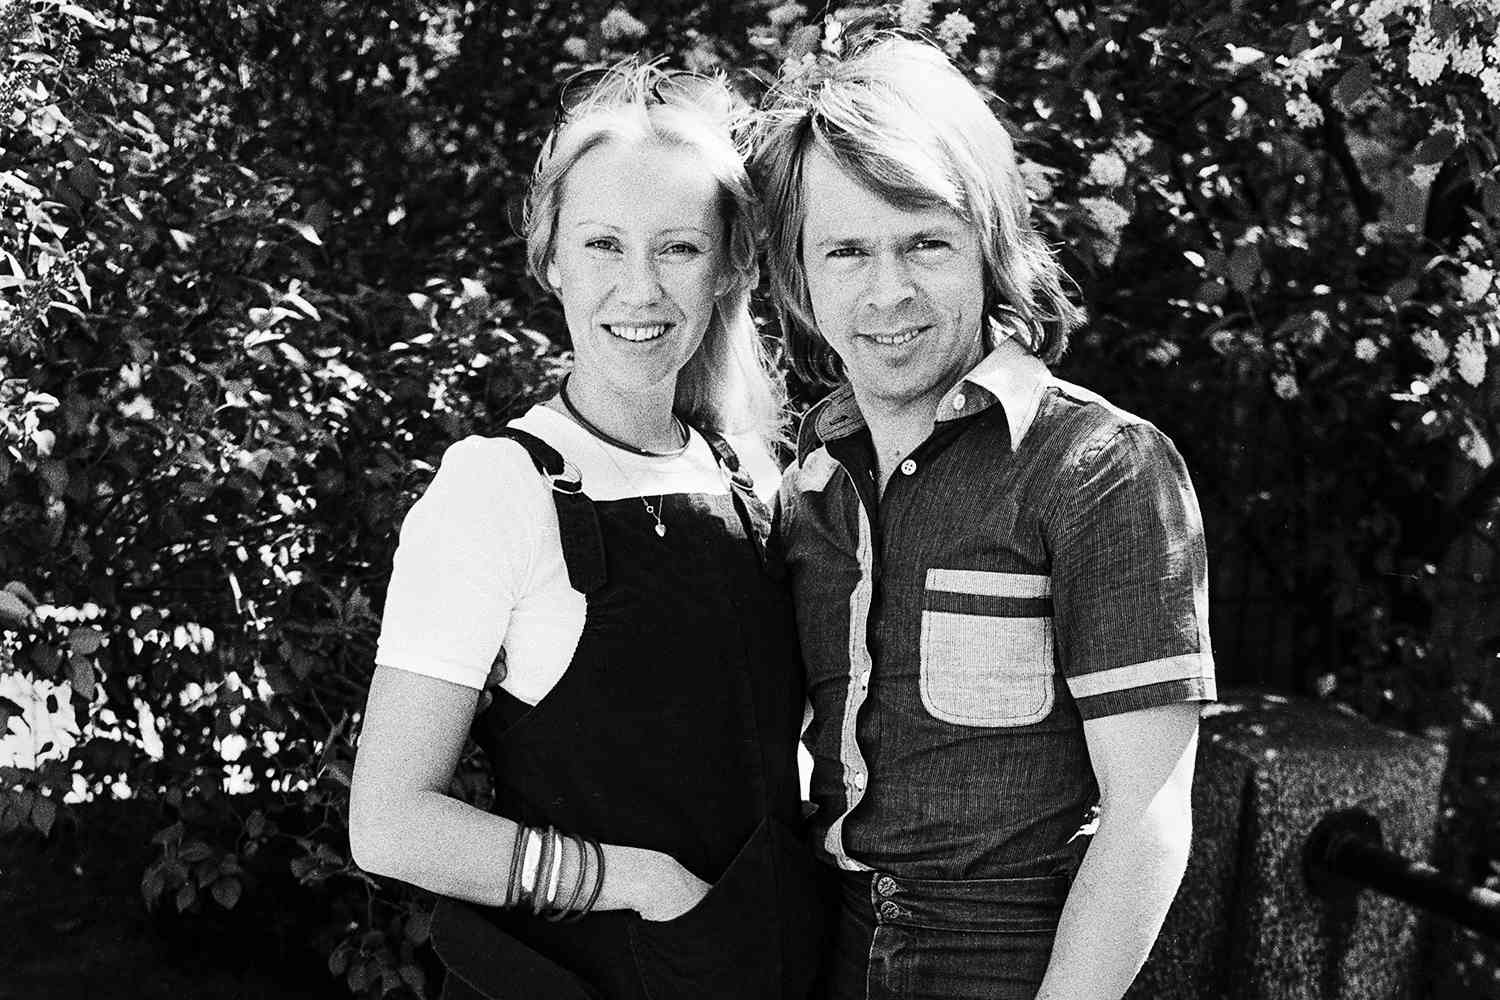 How ABBA's Agnetha Fältskog and Björn Ulvaeus Turned Their 'Difficult' Divorce into a Chart-Topping Hit